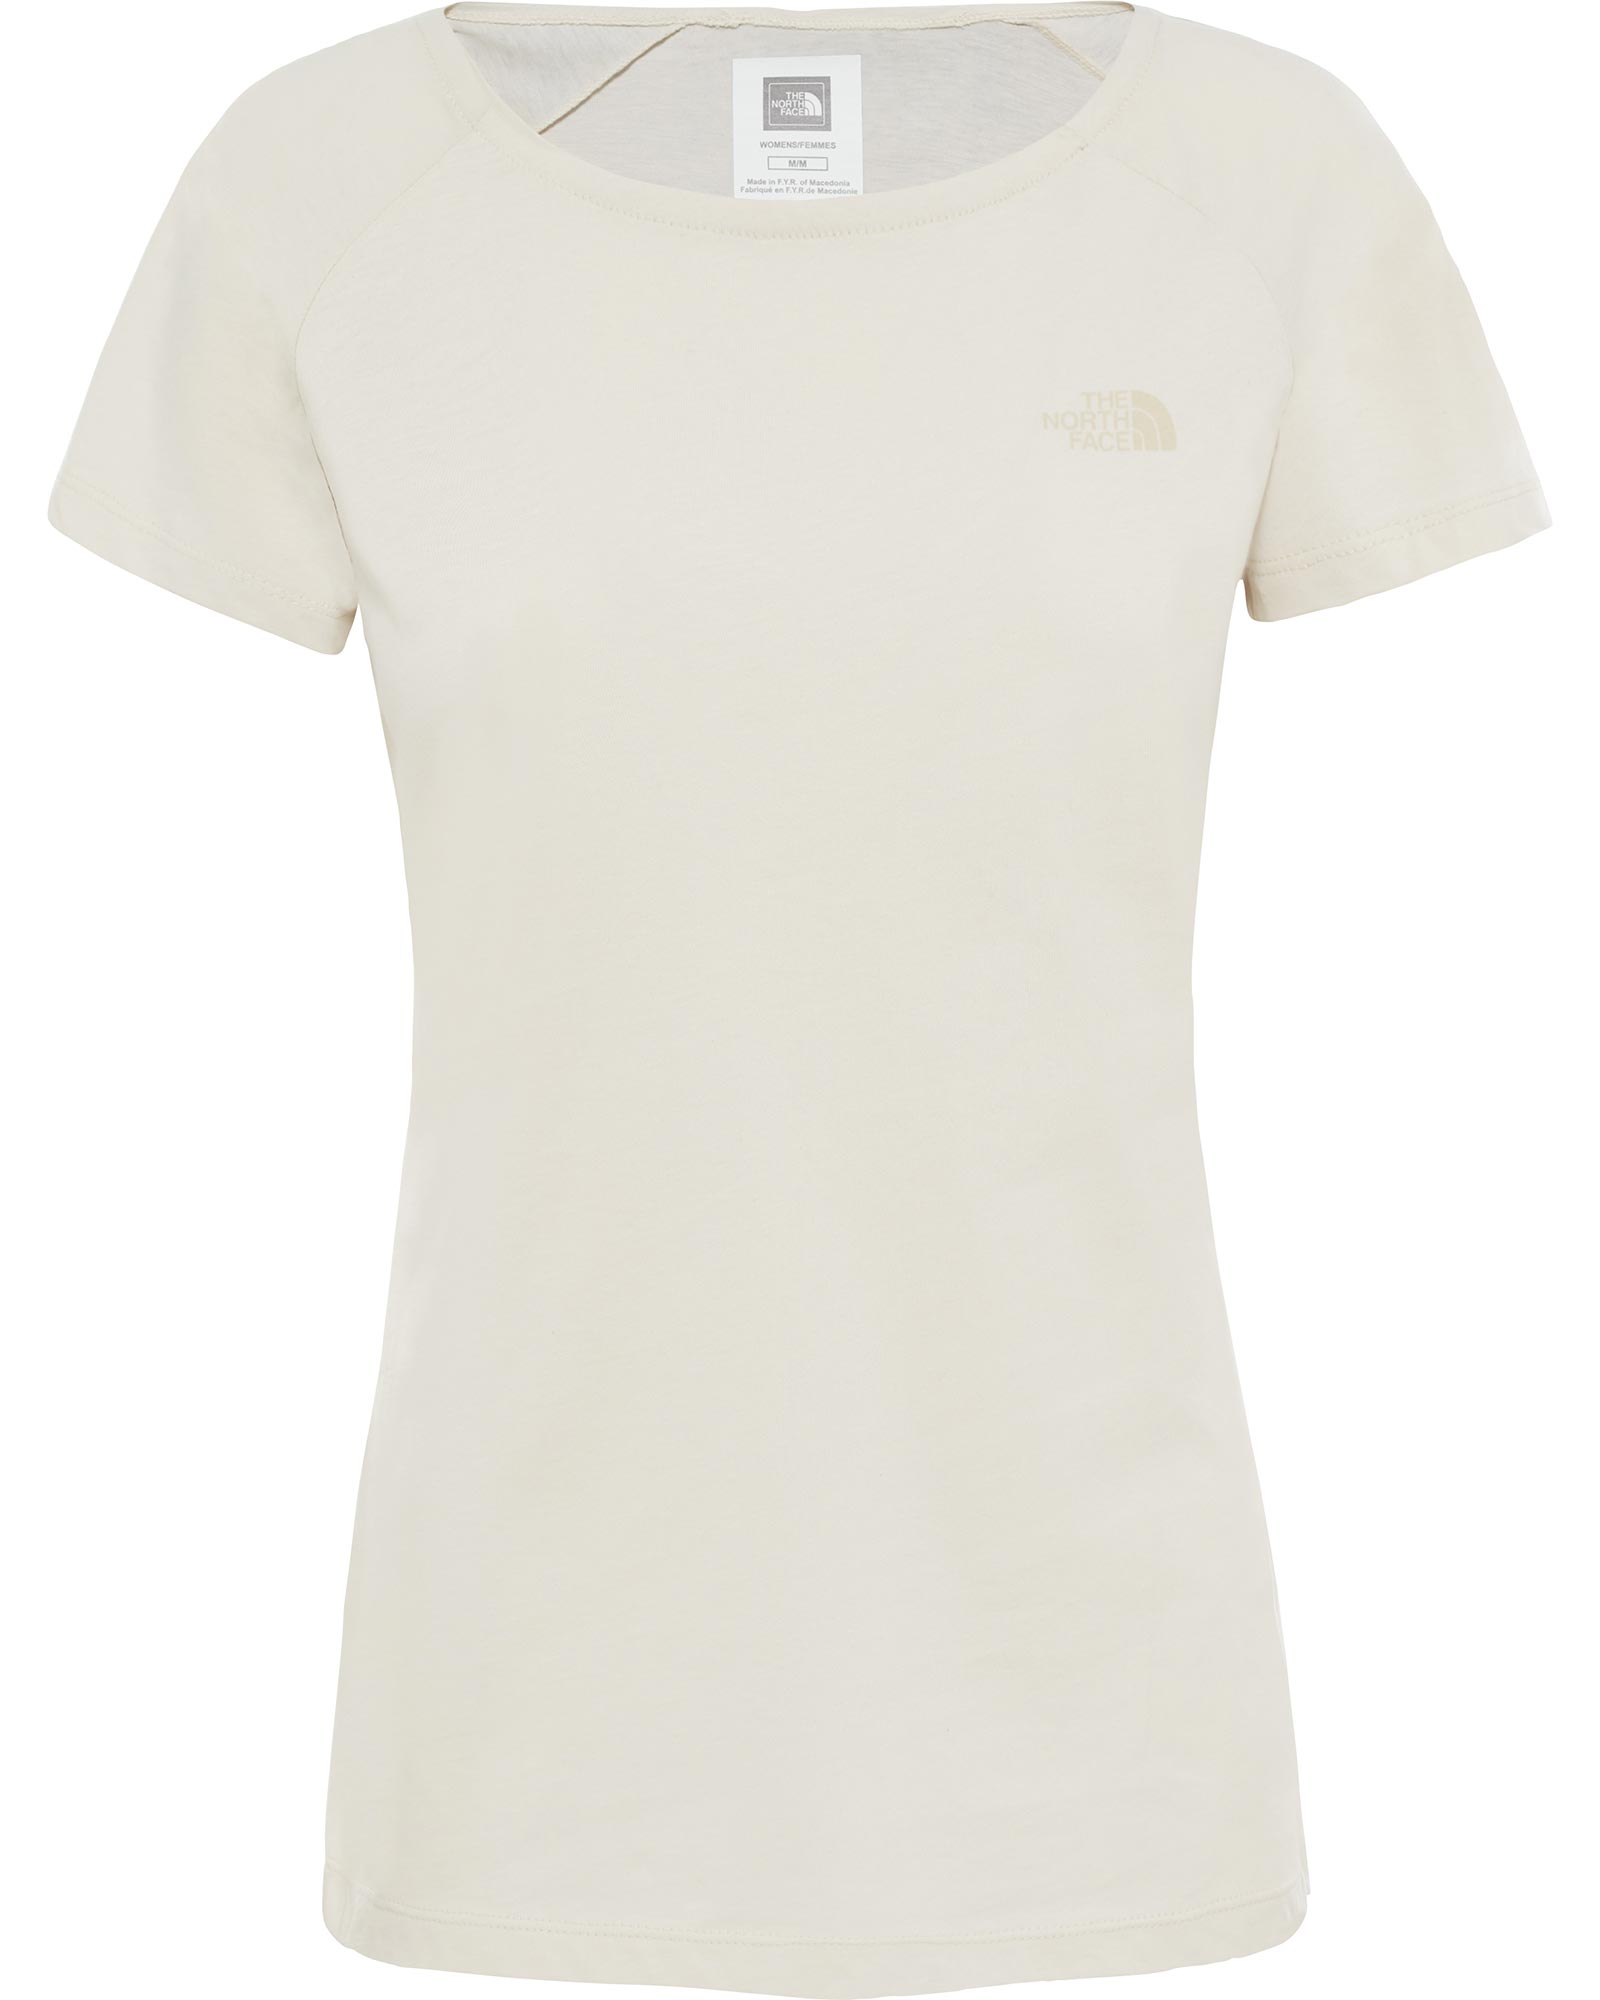 Product image of The North Face Raglan Simple Dome Women's T-Shirt